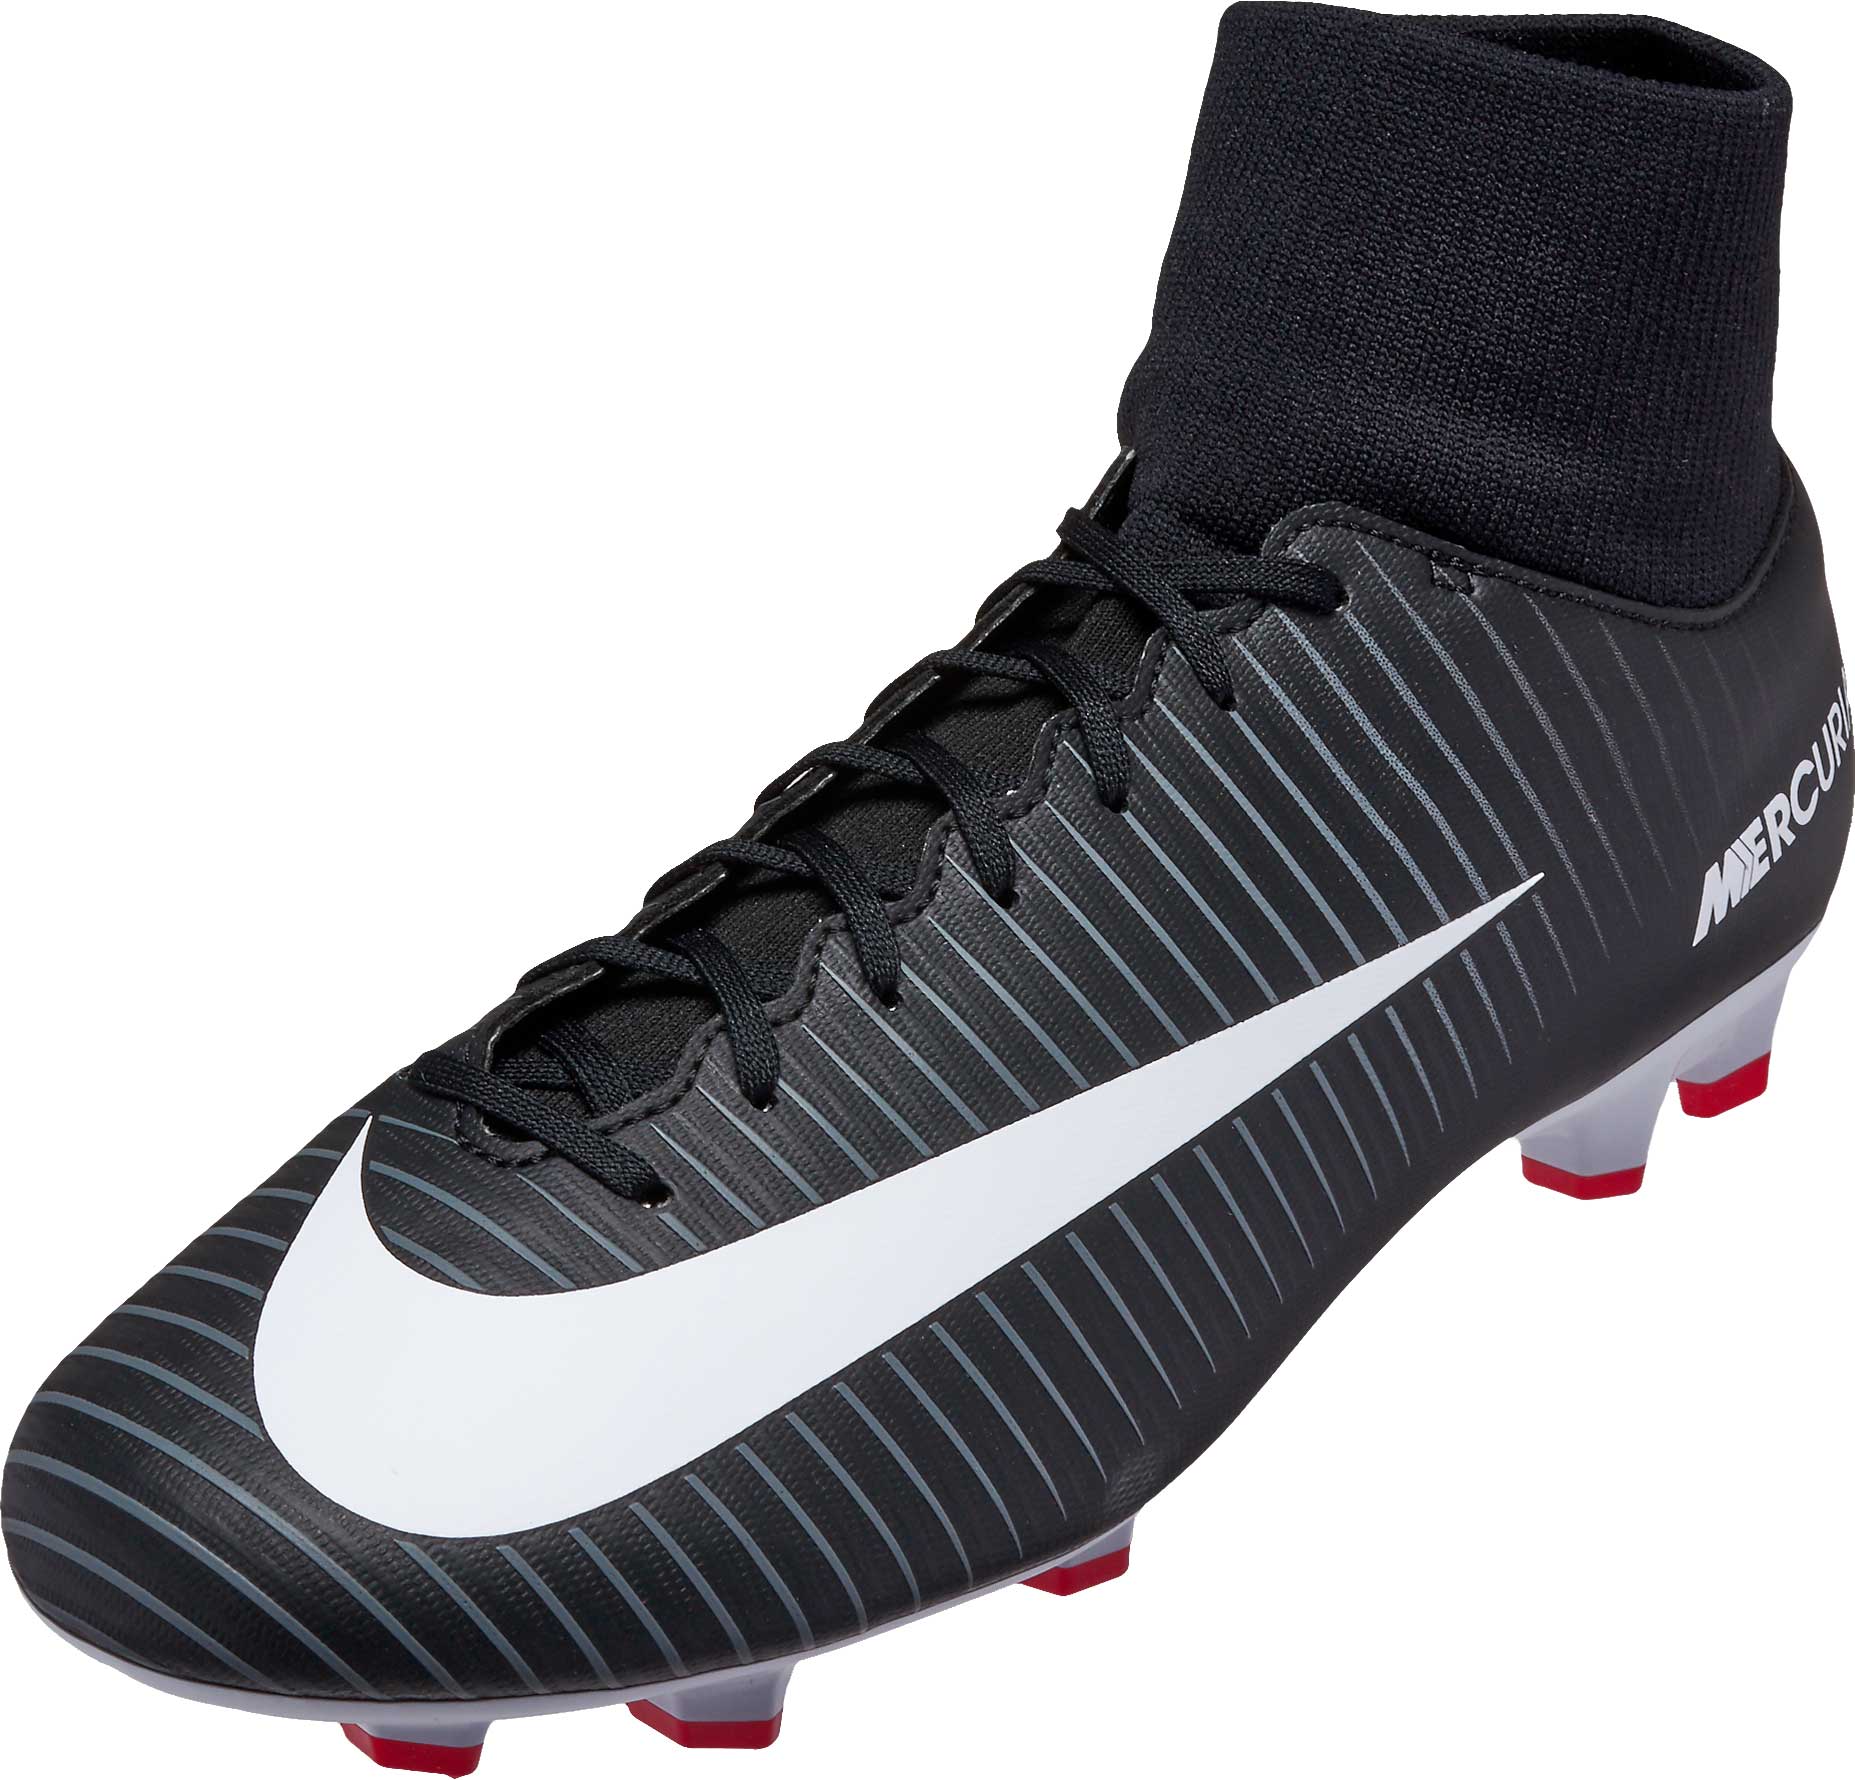 mercurial victory 6 df fg soccer cleat